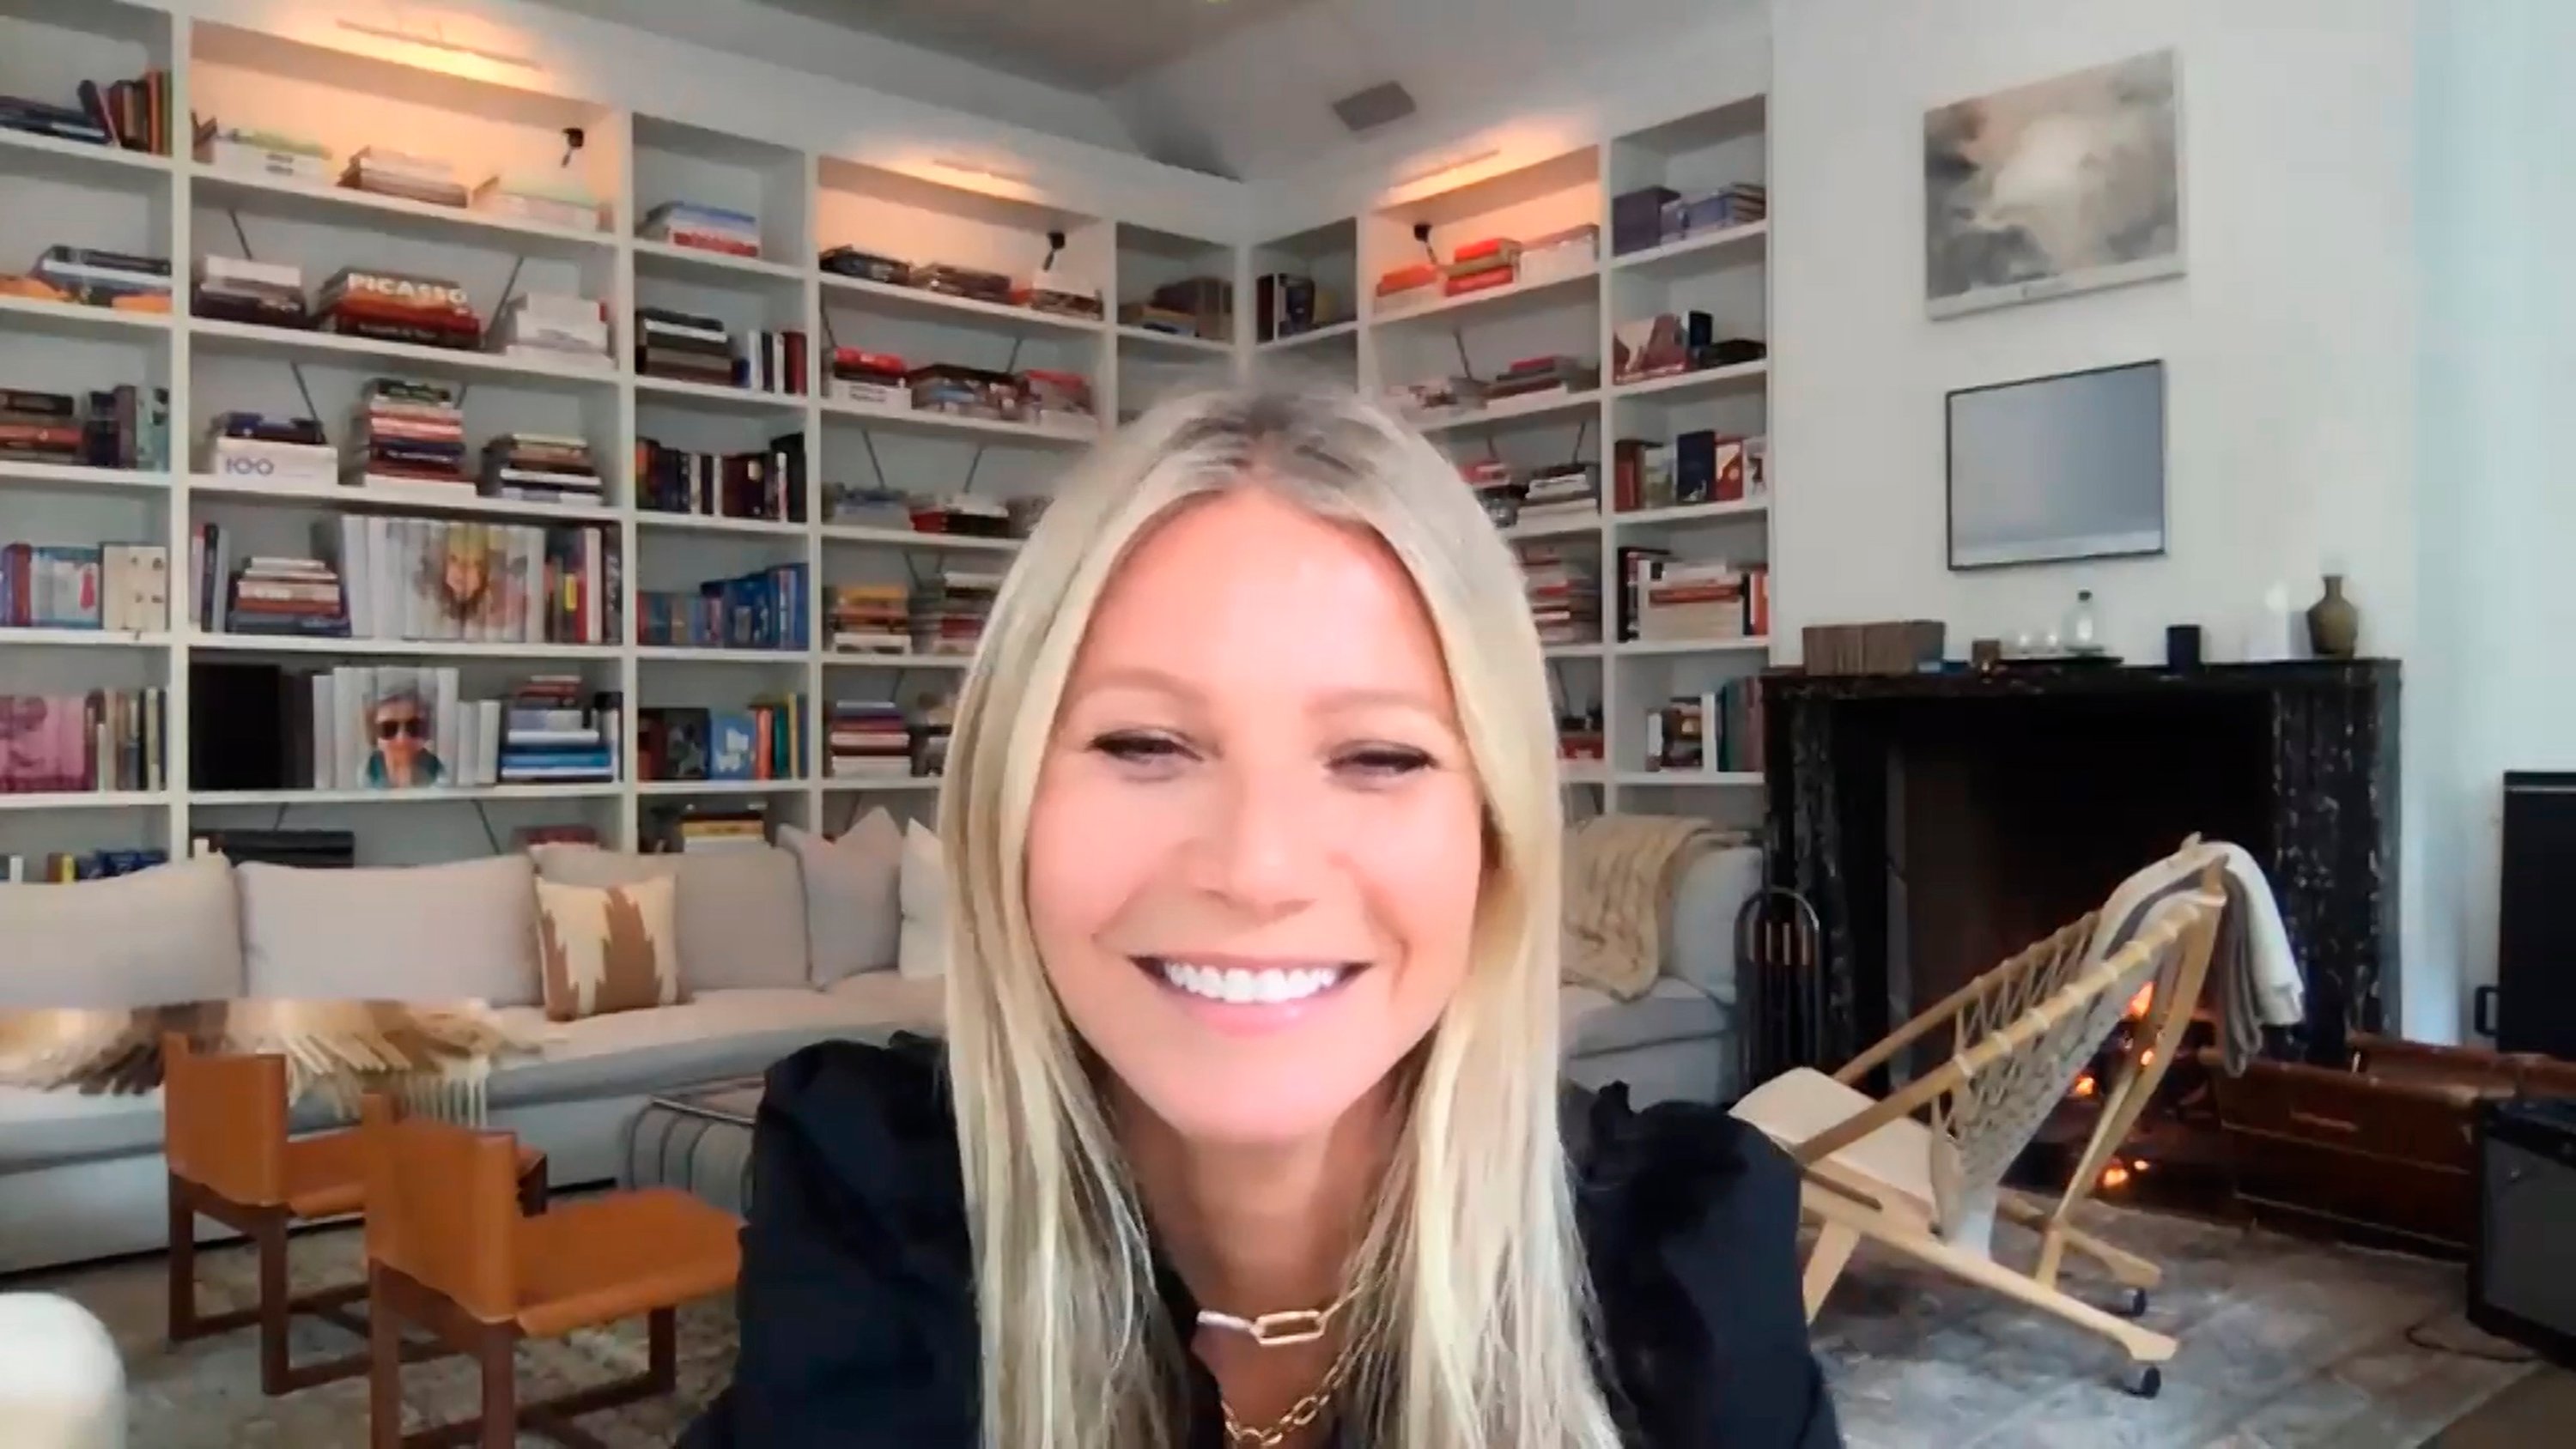 Screengrab of Gwyneth Paltrow smiling during an interview on The Tonight Show Starring Jimmy Fallon